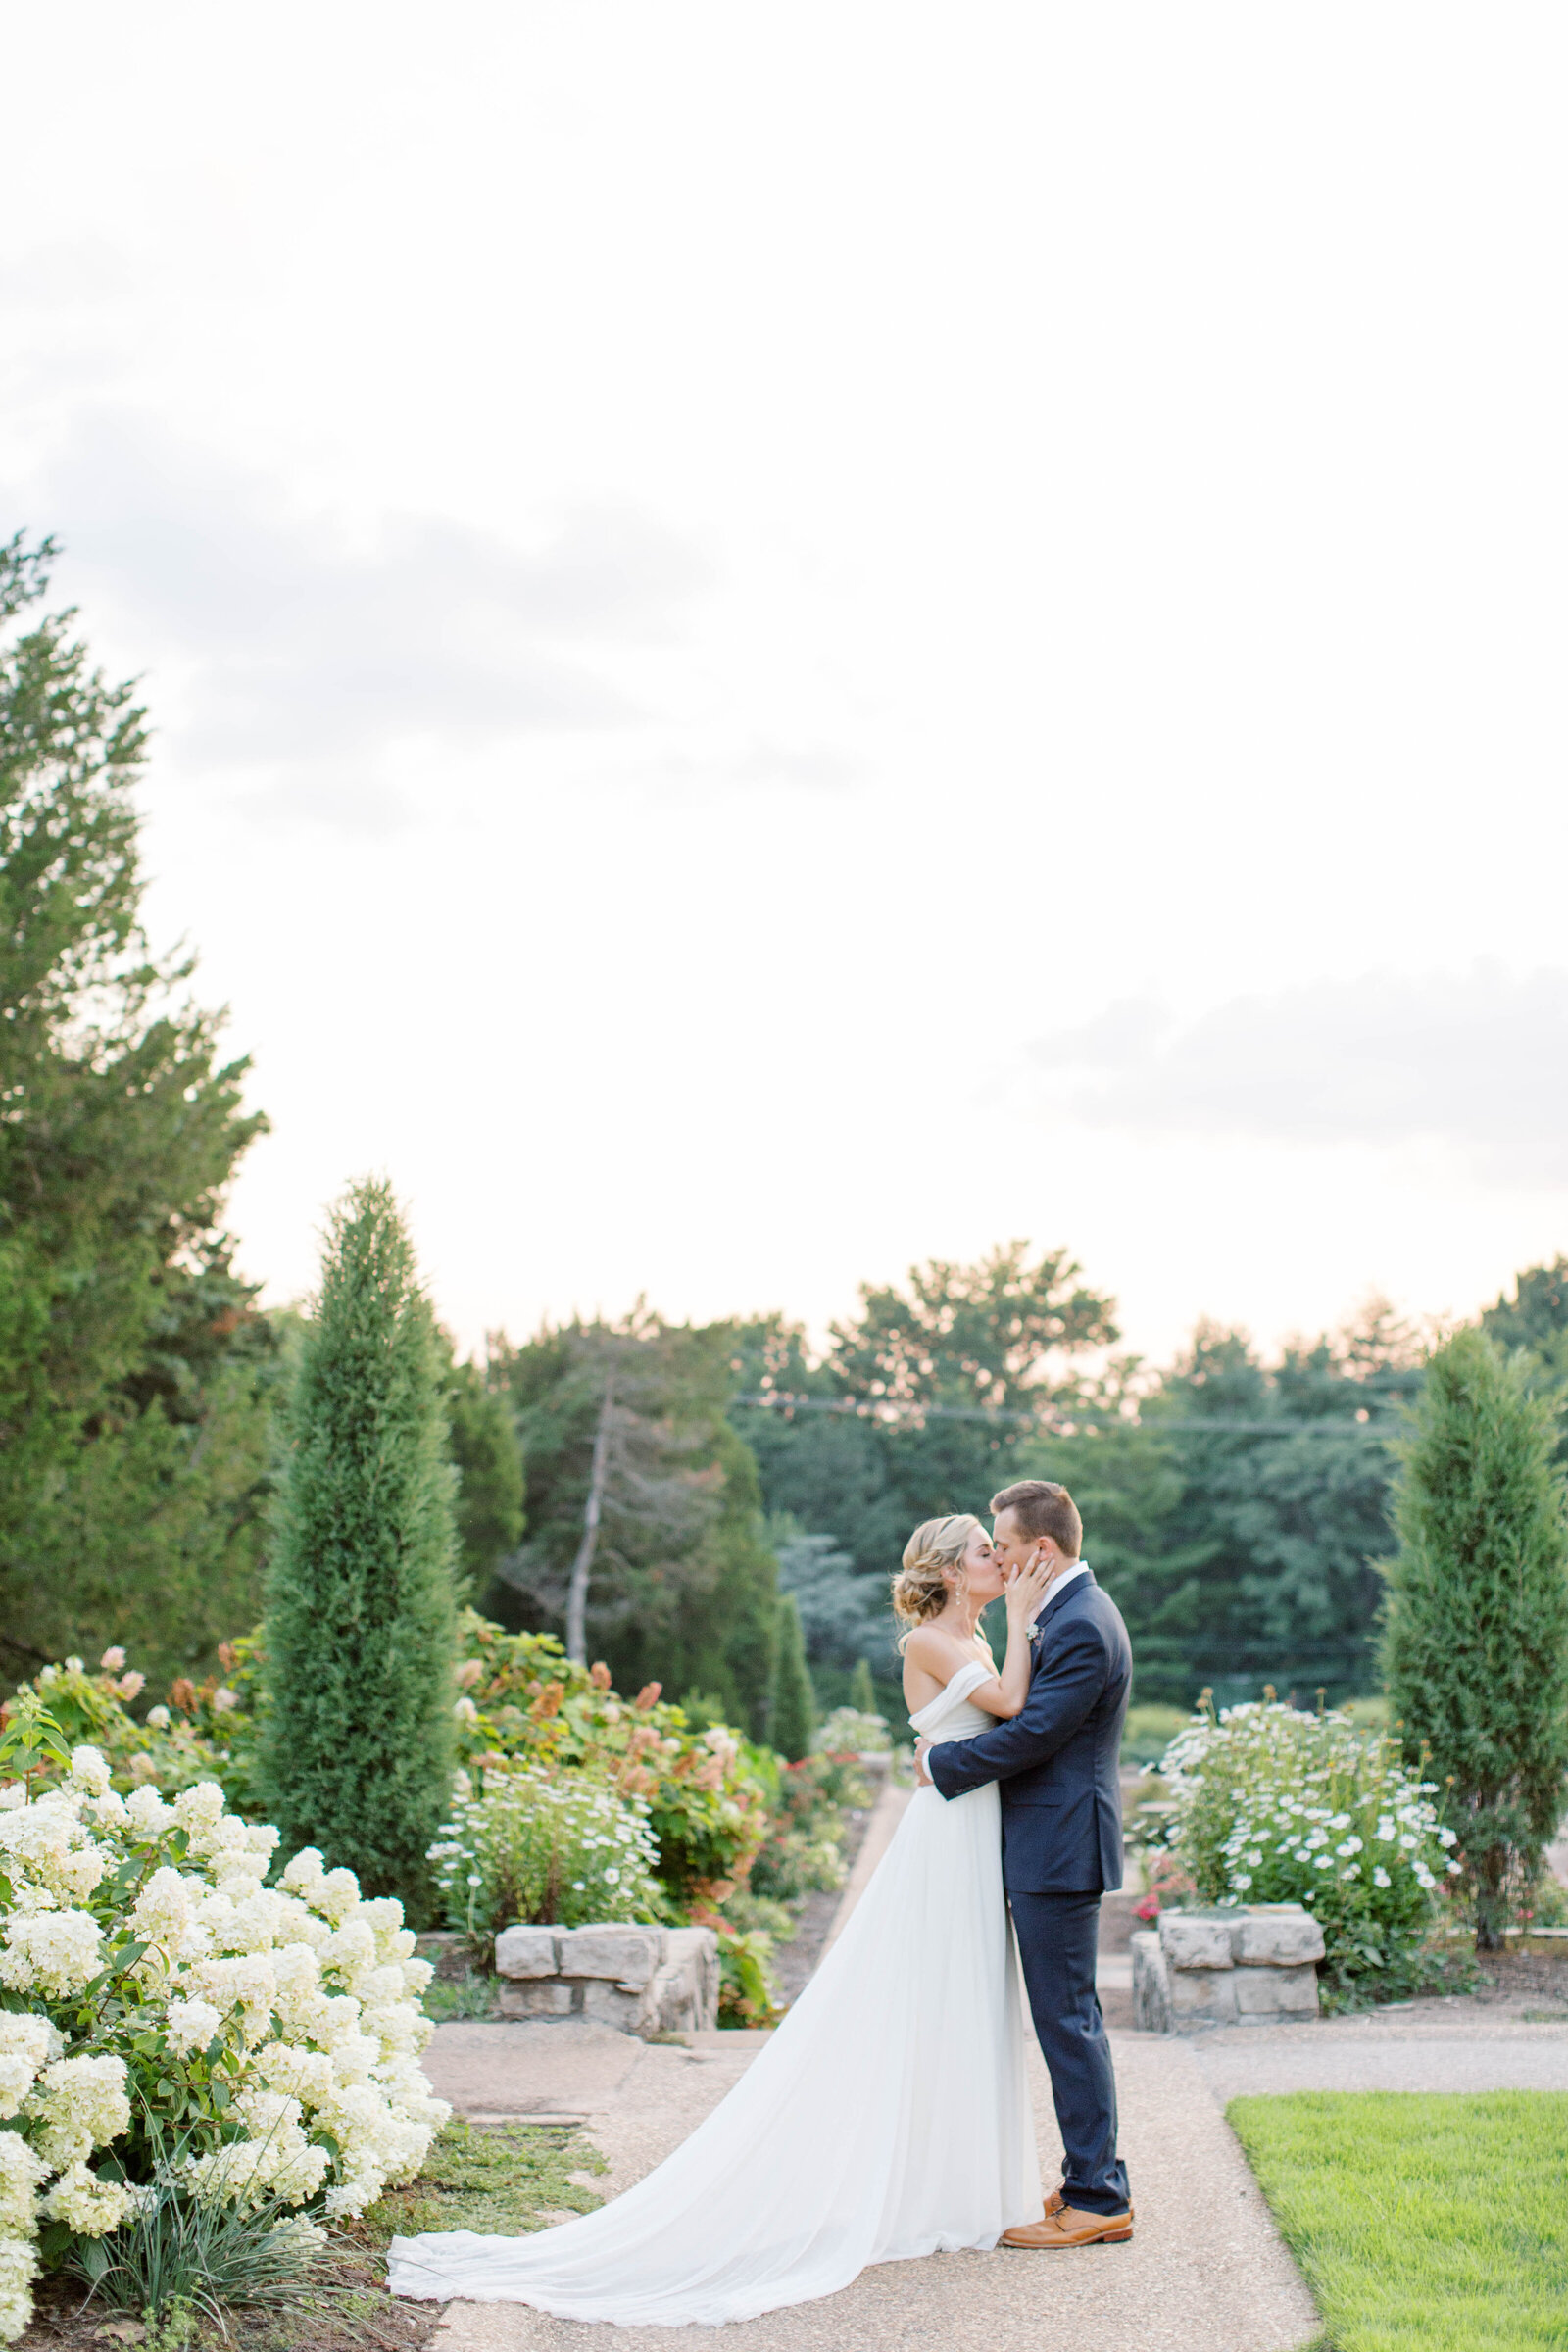 A bride caresses her groom's cheek while kissing him in a garden full of blooms